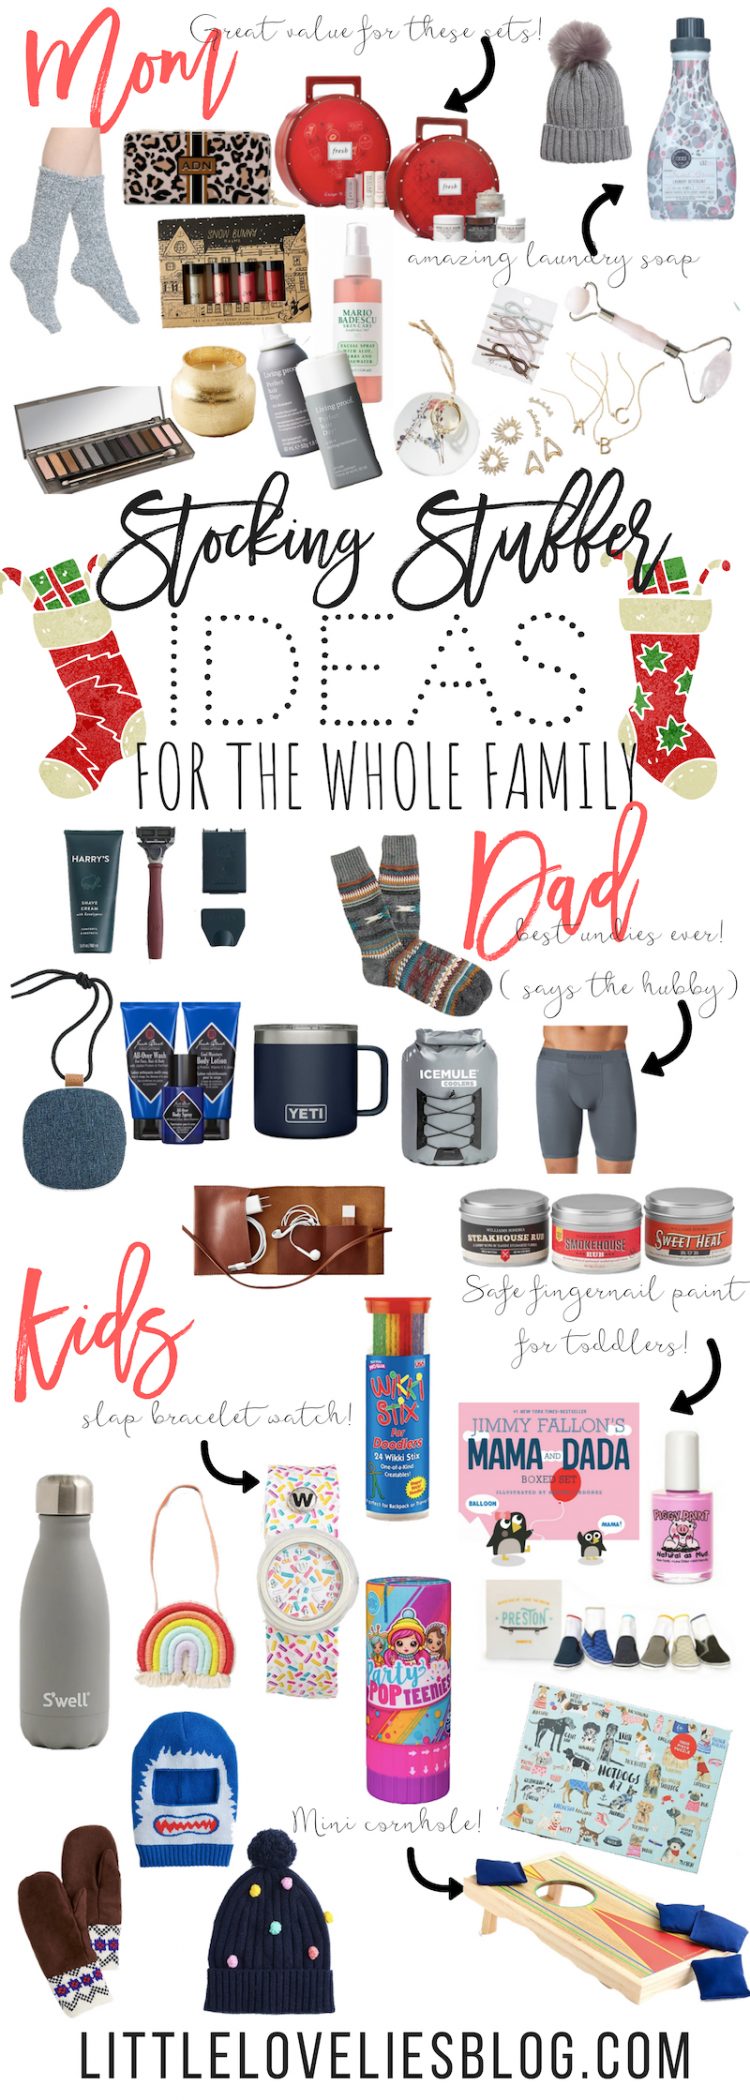 8 Mom stocking stuffers you actually want - Savvy Sassy Moms